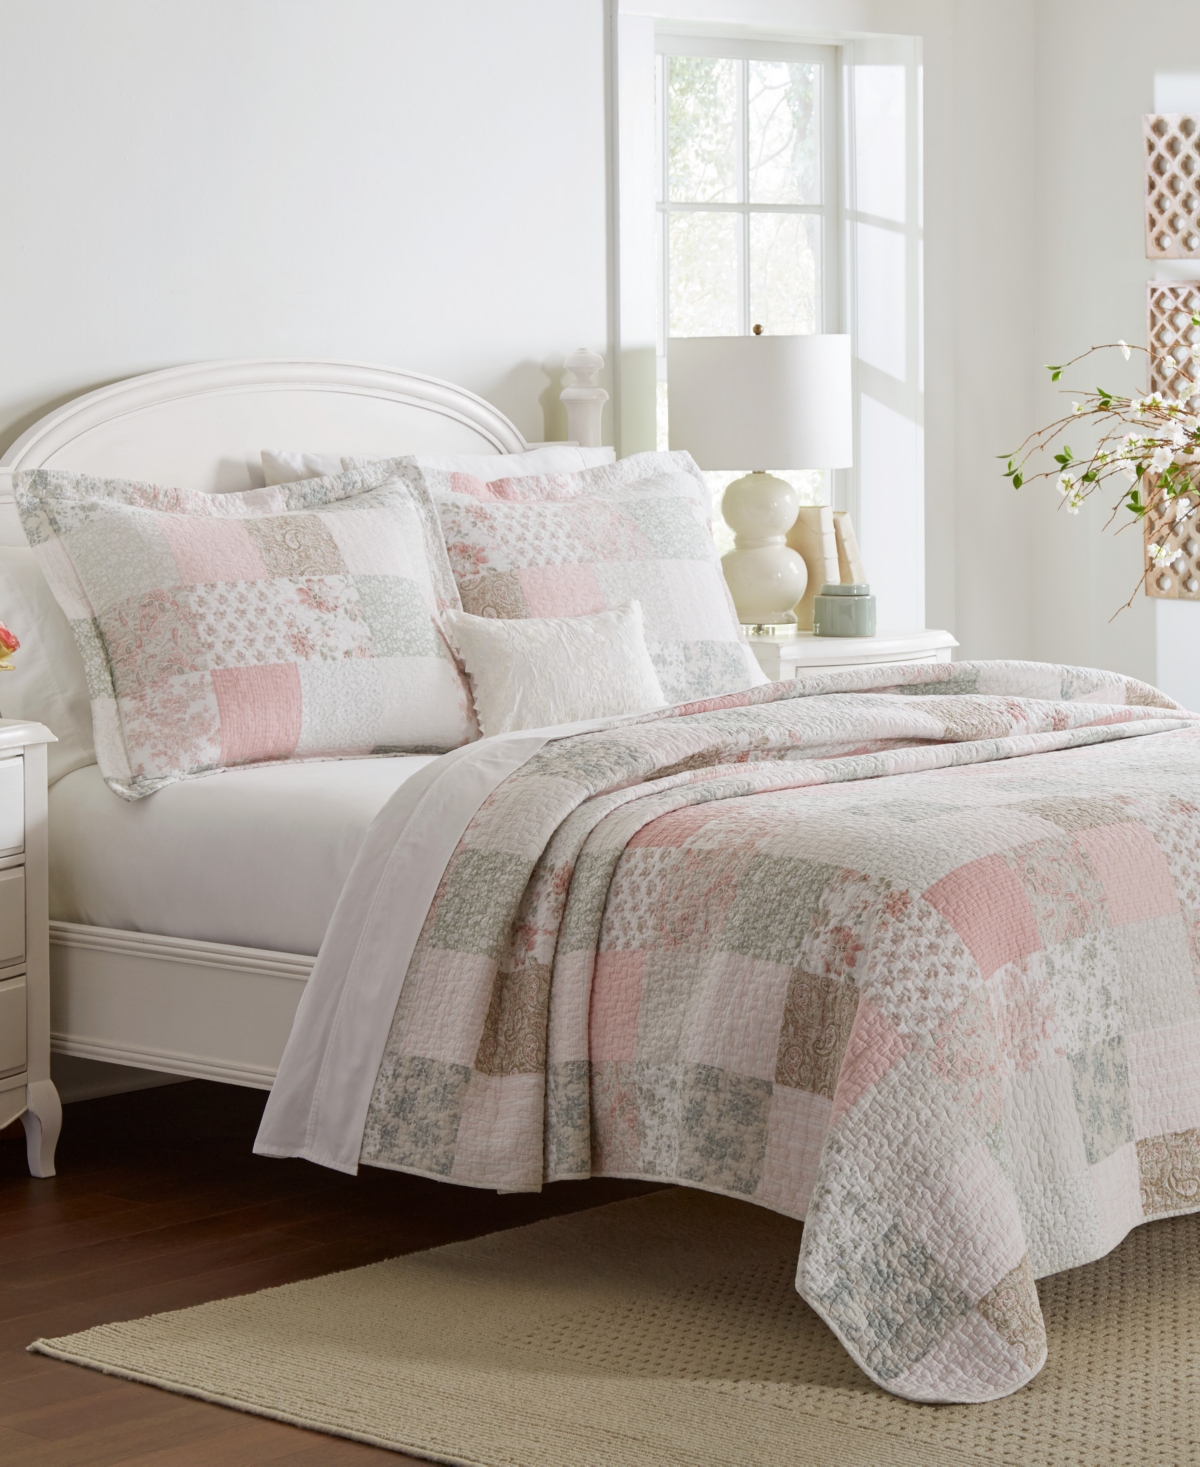 Laura Ashley Celina Patchwork 3-pc. Quilt Set, Full/queen In Pink,sage